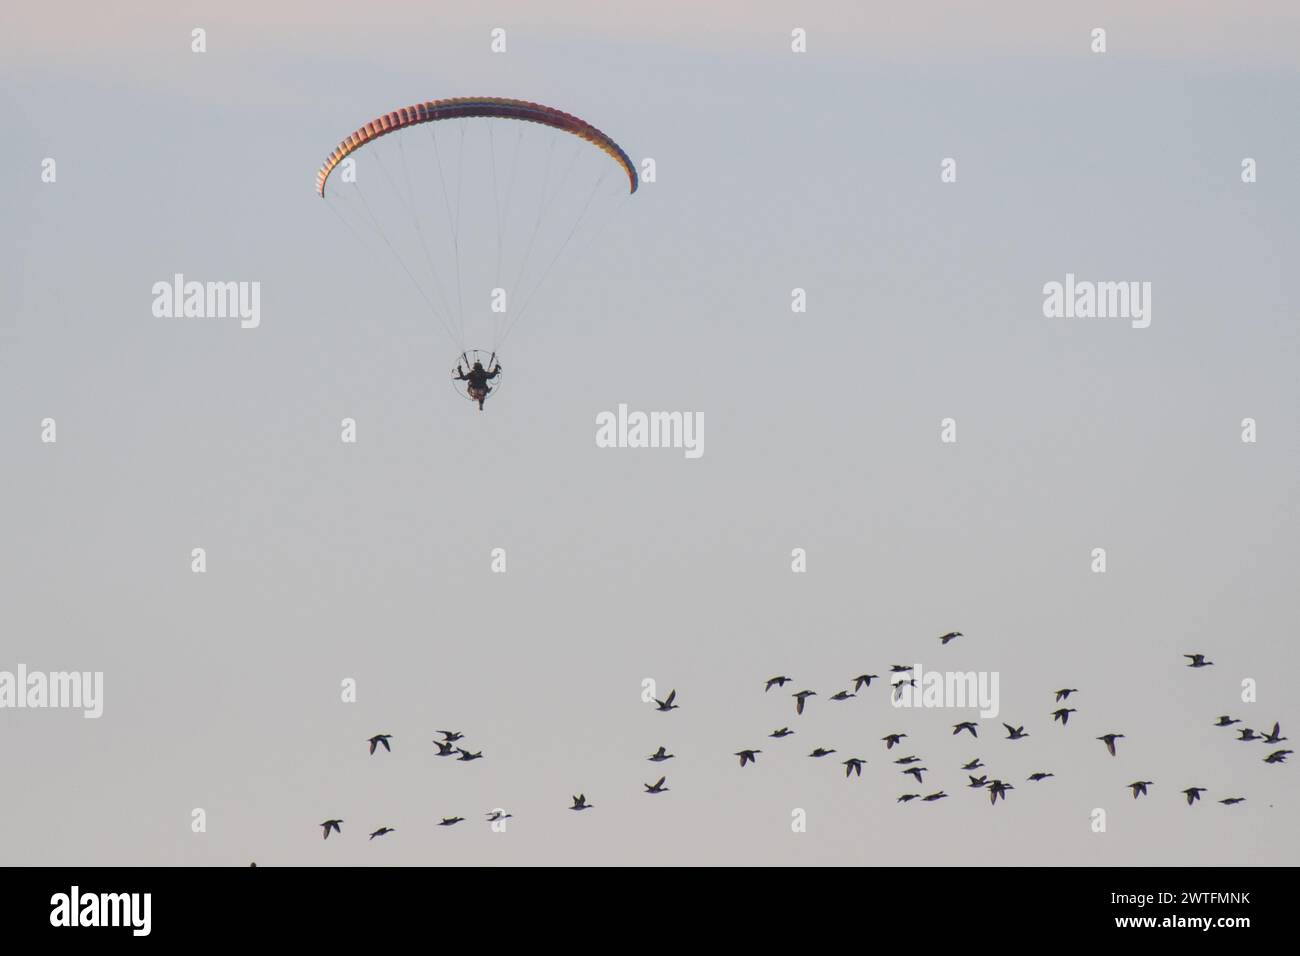 Powered parachute flying with birds Stock Photo